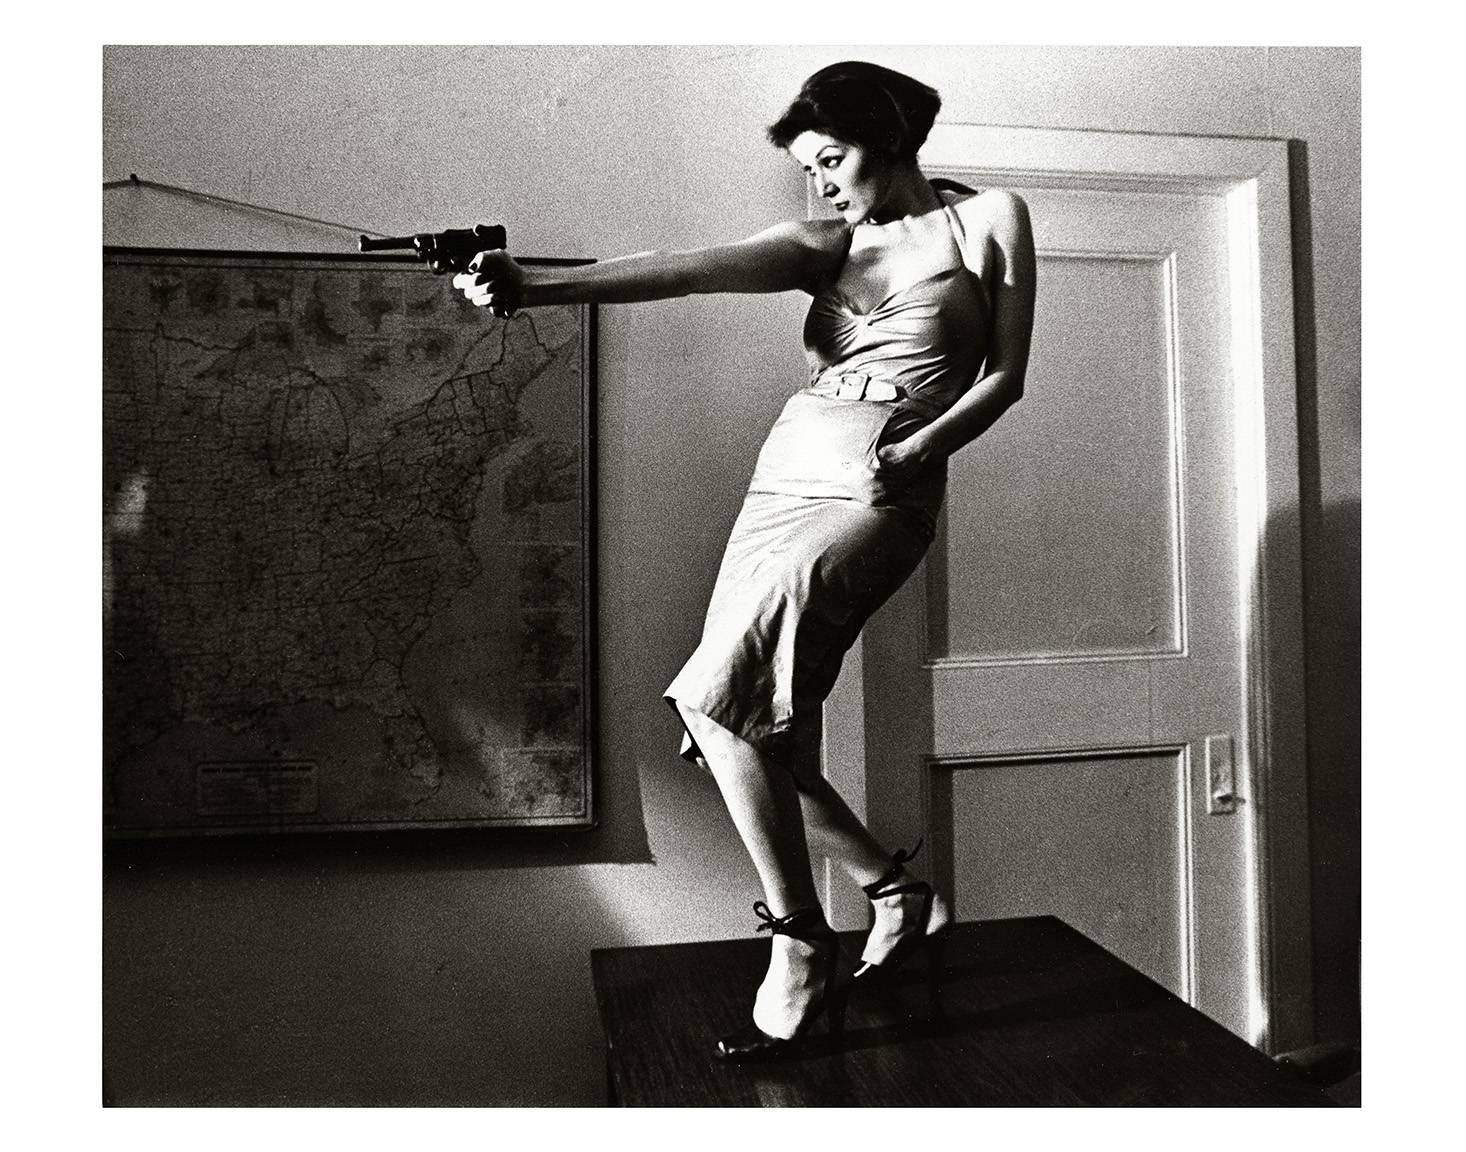 Fernando Natalici Black and White Photograph - Girl With A Gun, Patti Astor East Village photo 1977 (The Foreigner) 